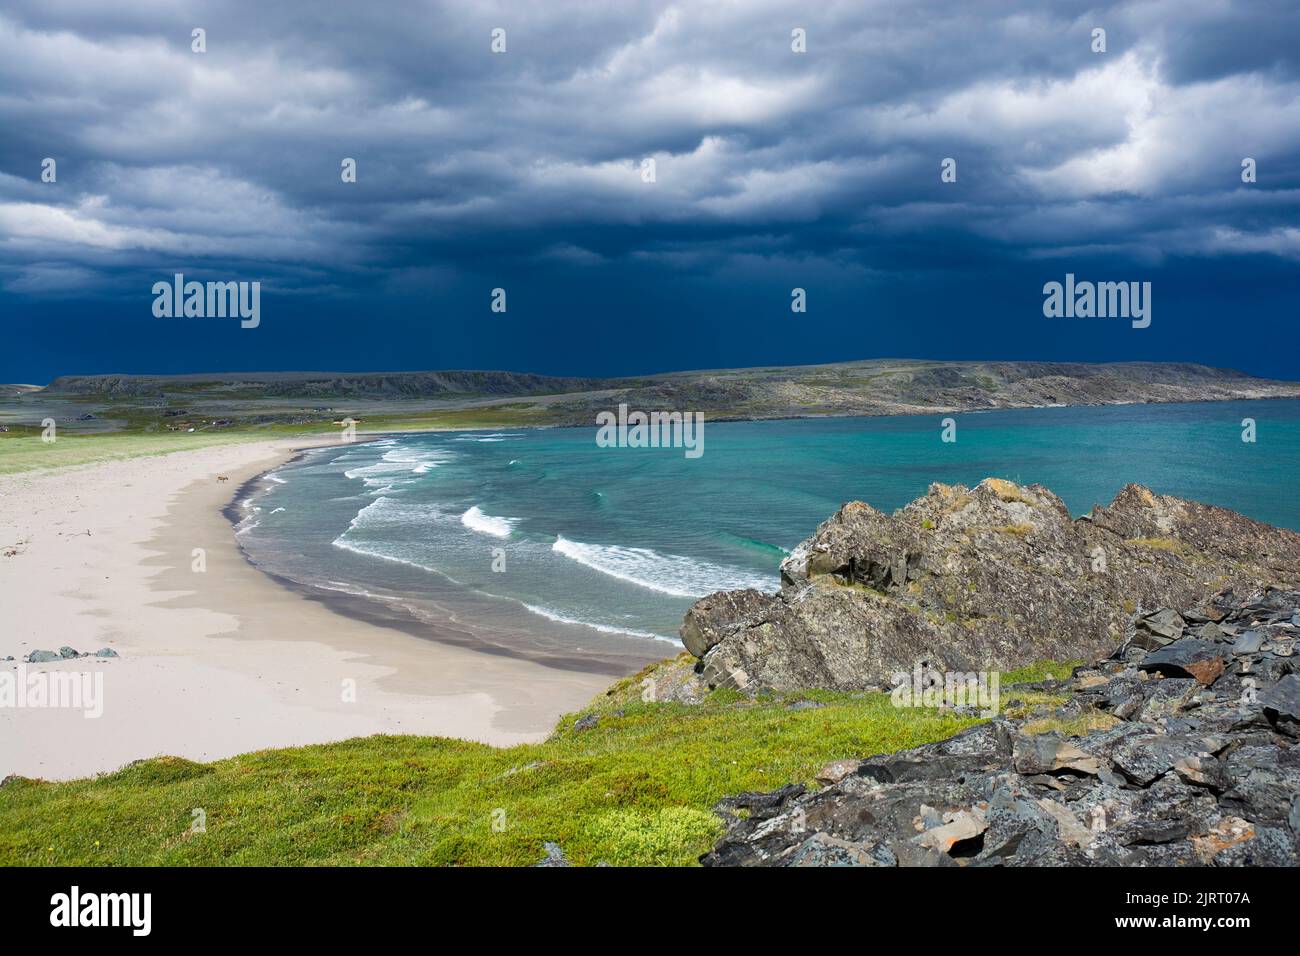 Stormy clouds over beautiful sandy beach in Sandfjordneset Nature Reserve, Norway Stock Photo